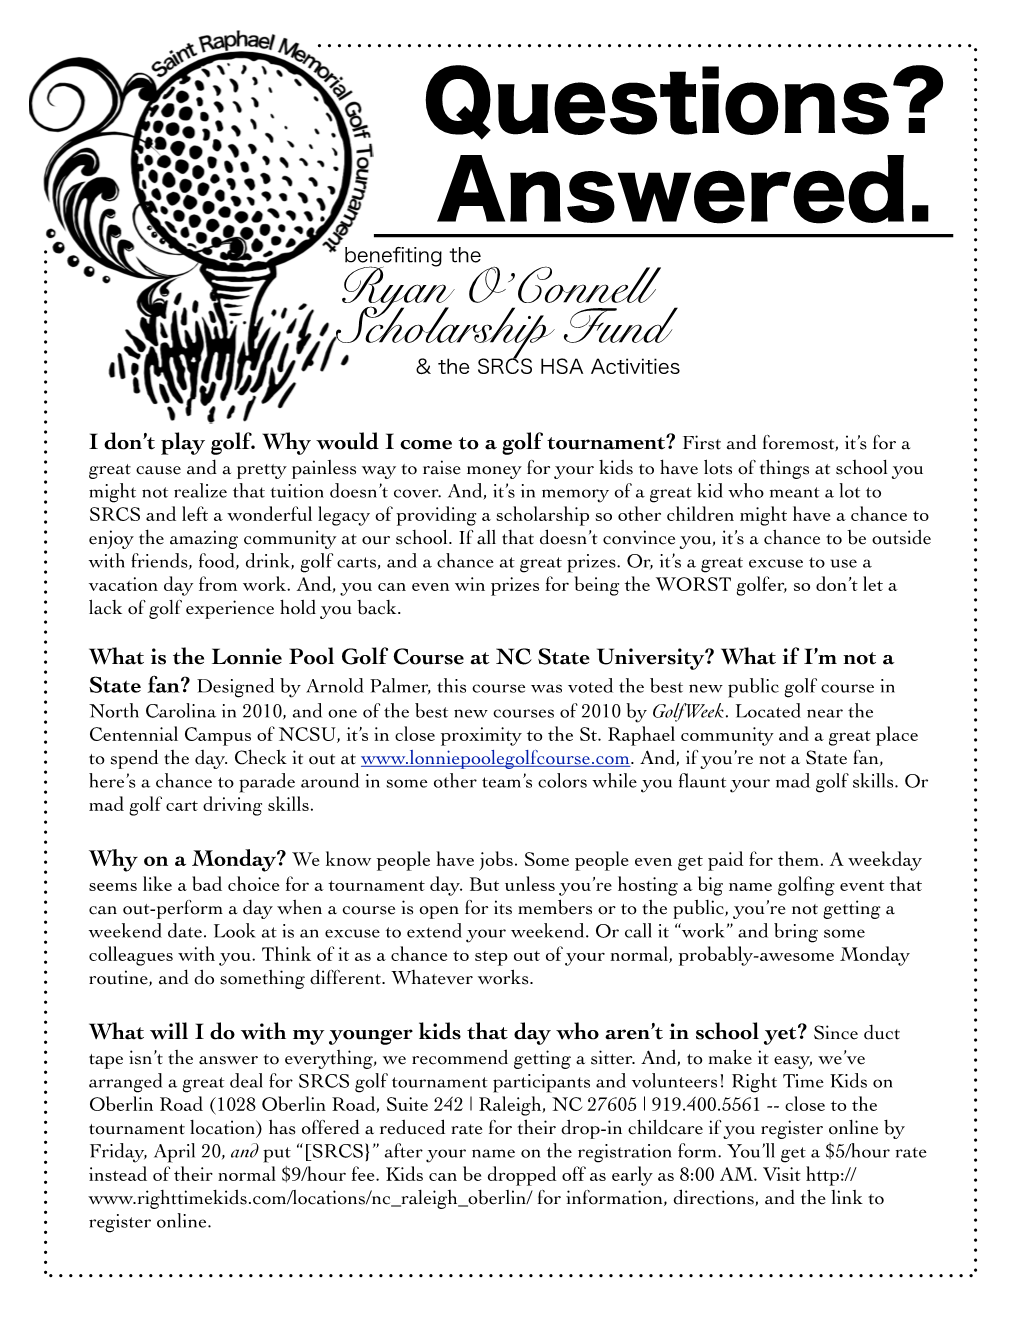 Questions? Answered. Beneﬁting the Ryan O’Connell Scholarship Fund & the SRCS HSA Activities